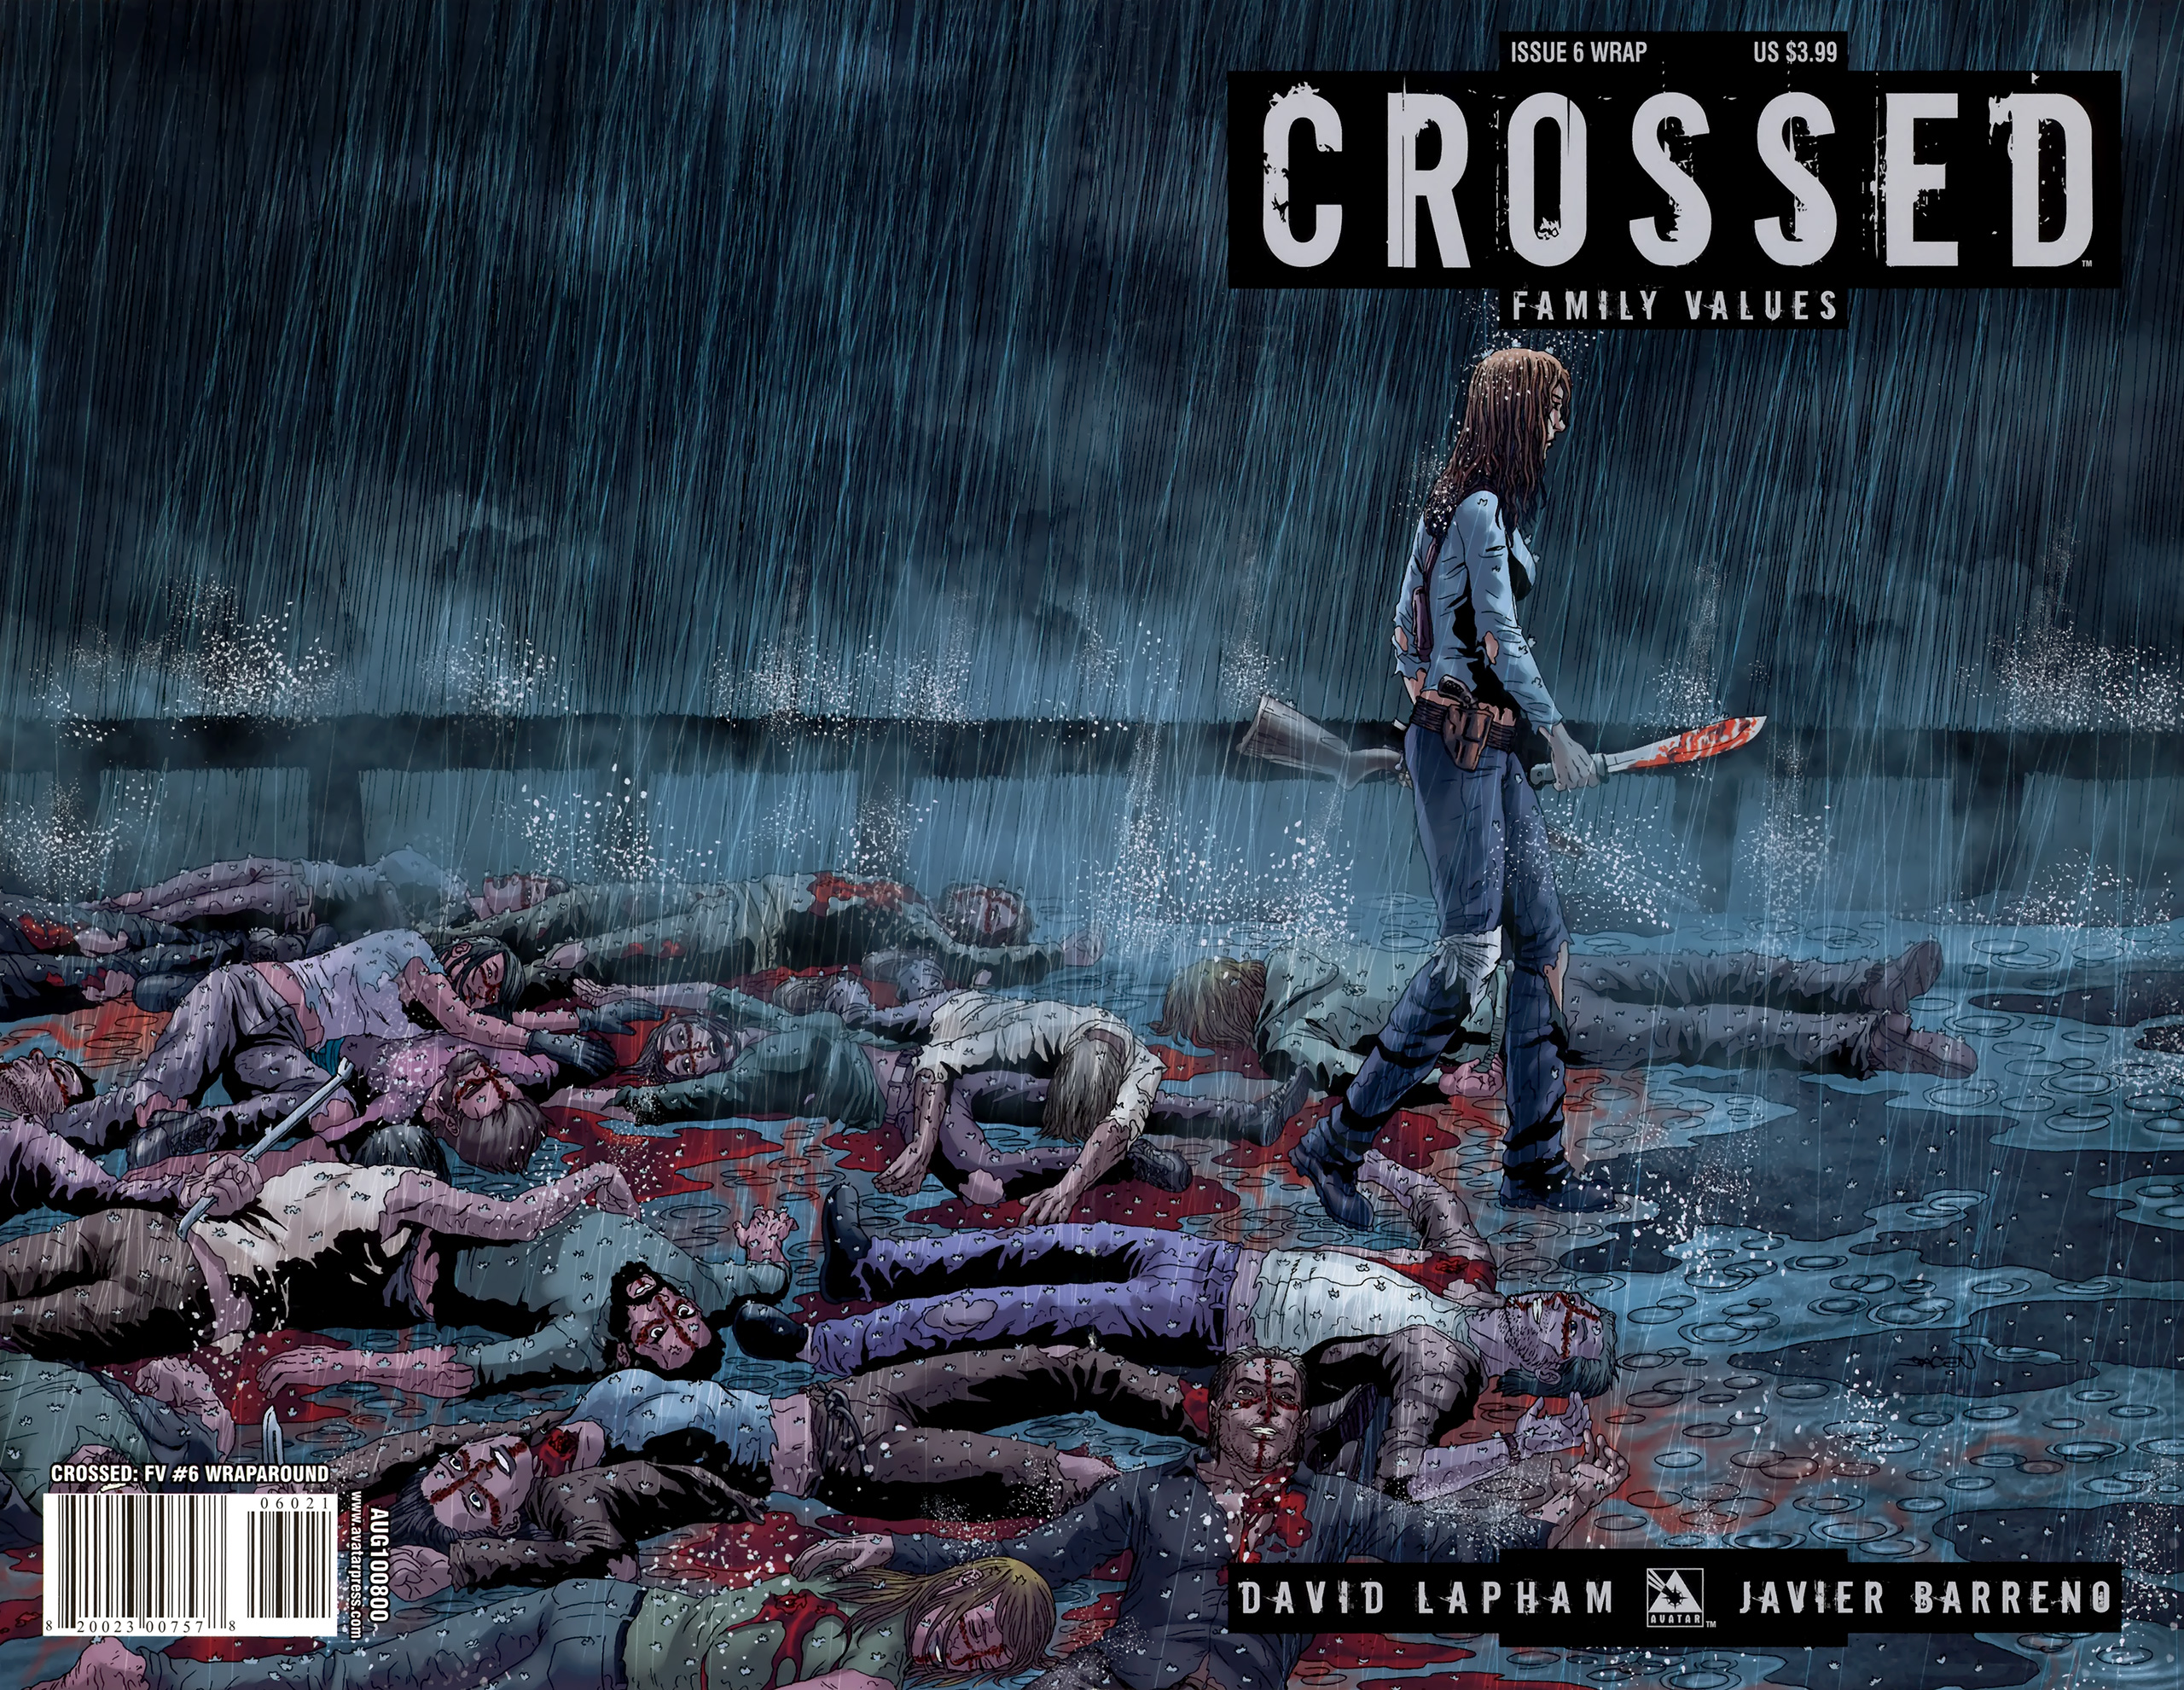 Crossed Family Values - Issue 6 of 7